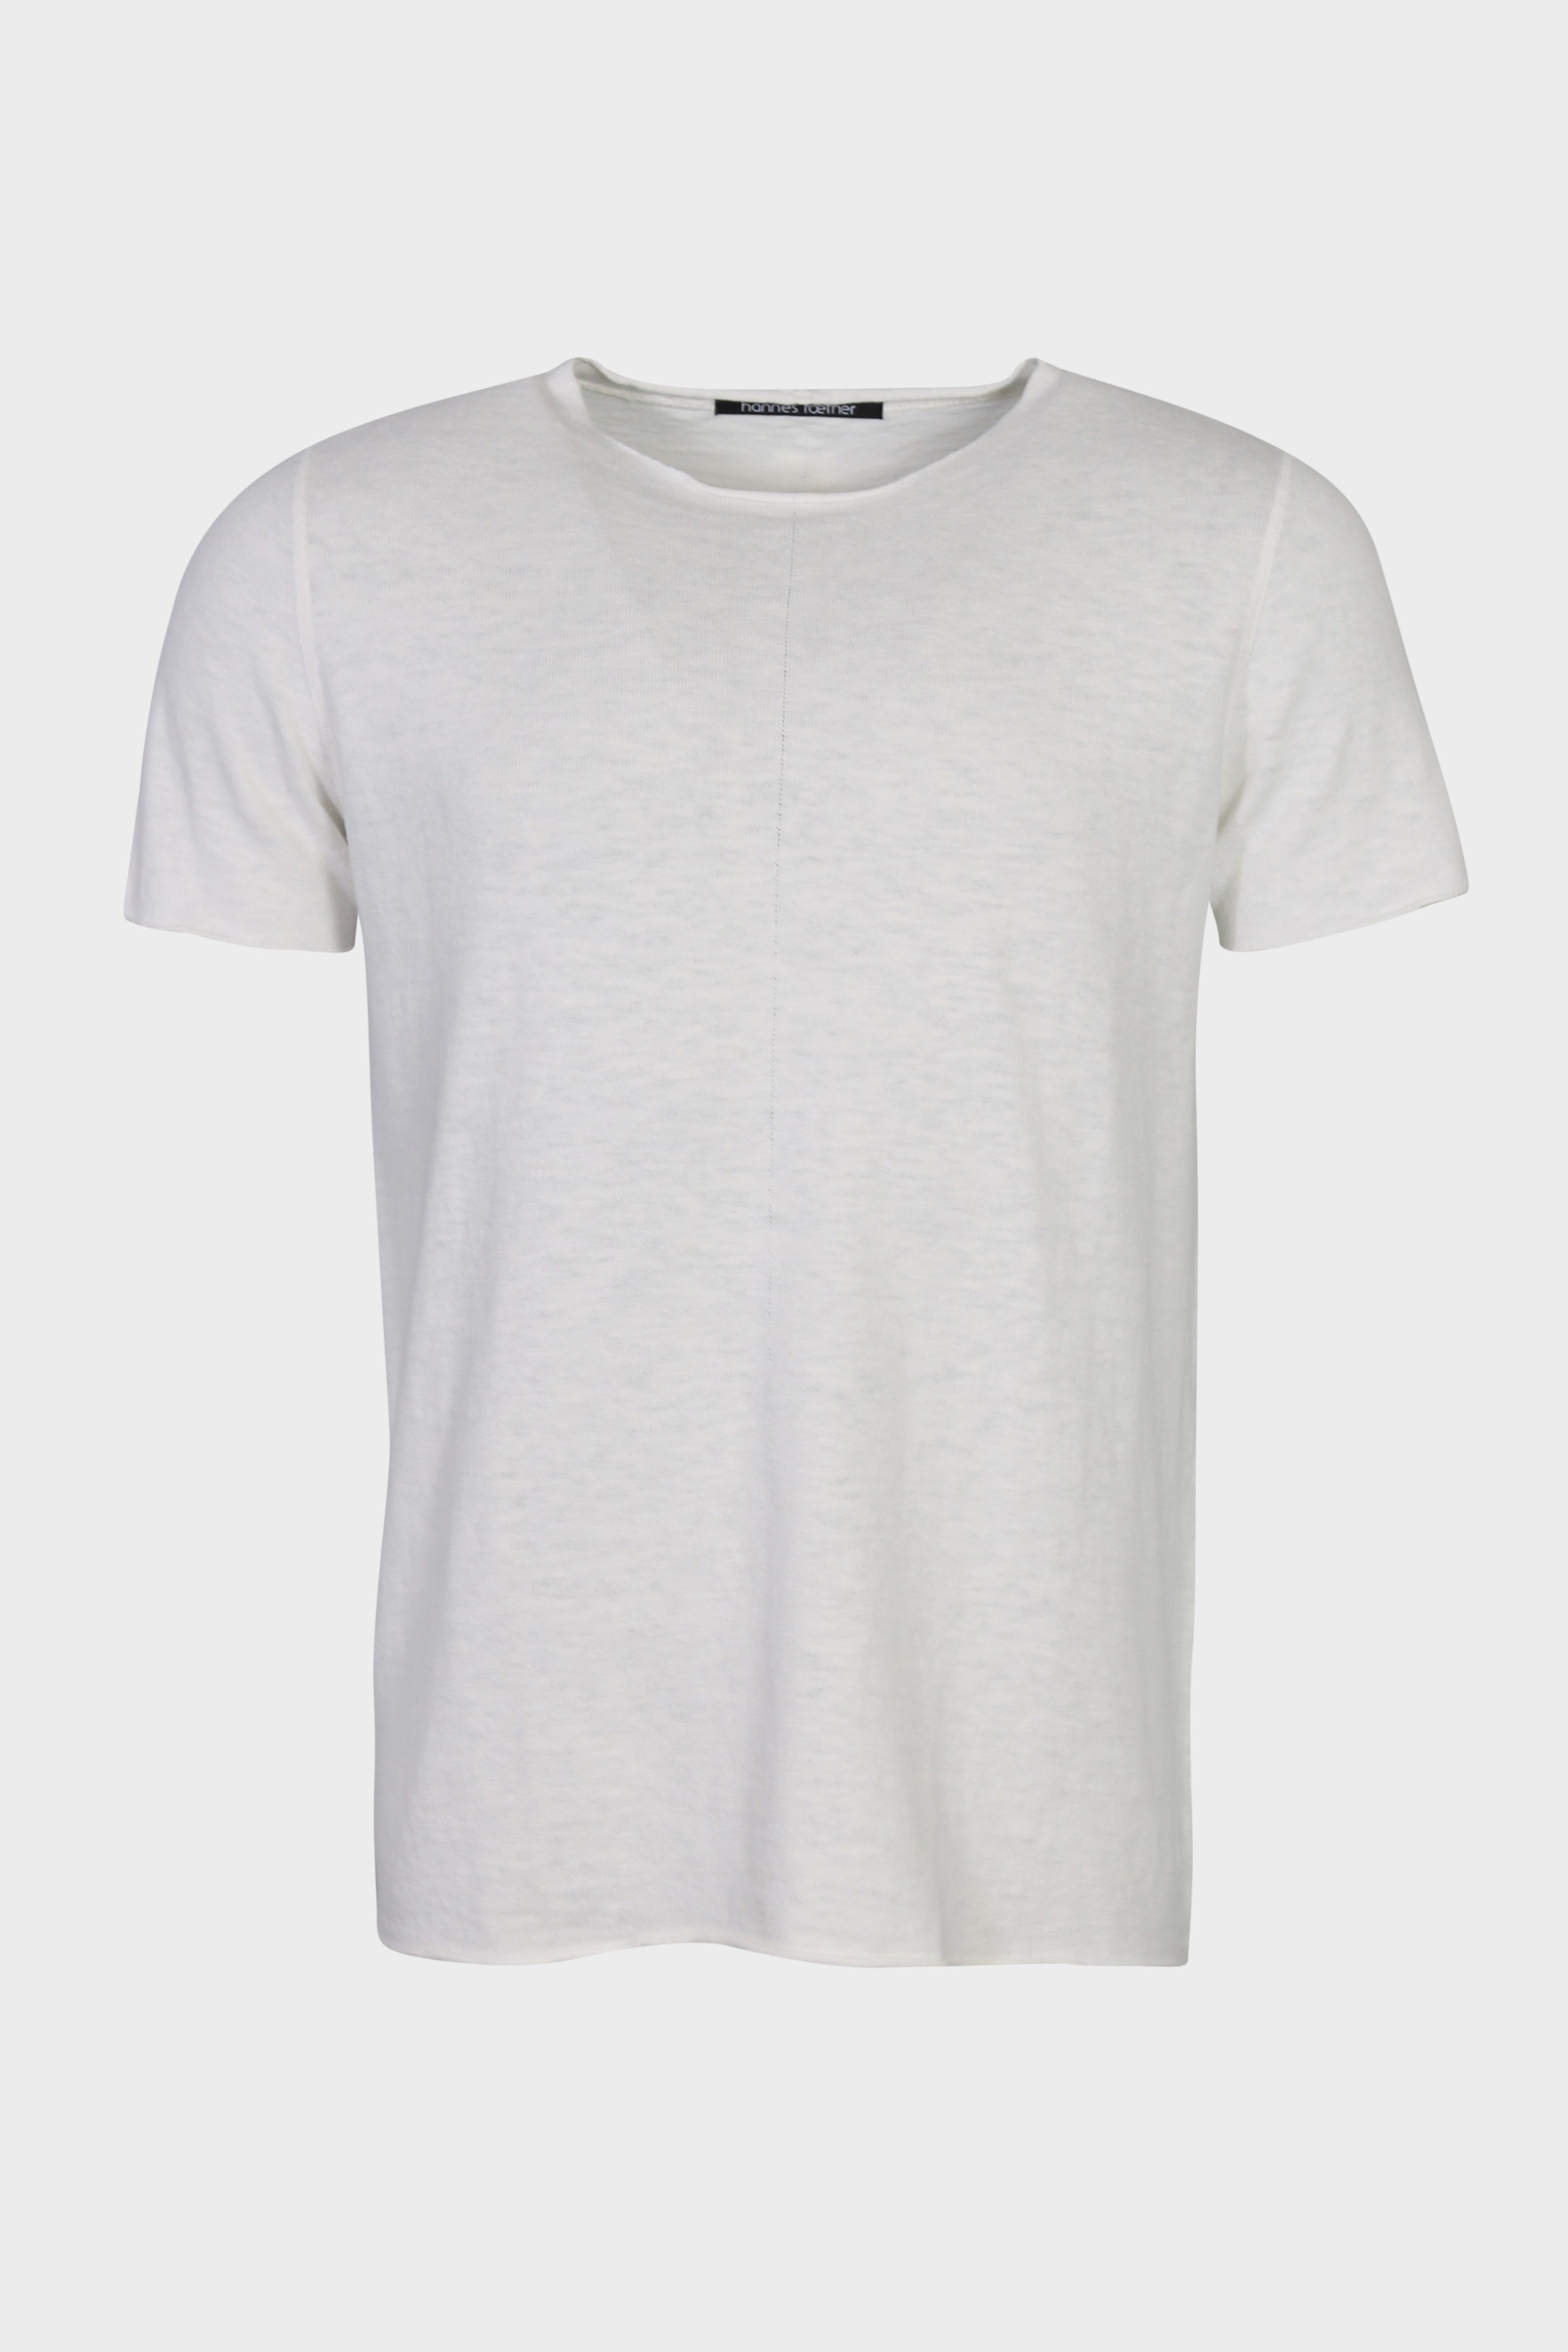 HANNES ROETHER Knit T-Shirt in Offwhite L